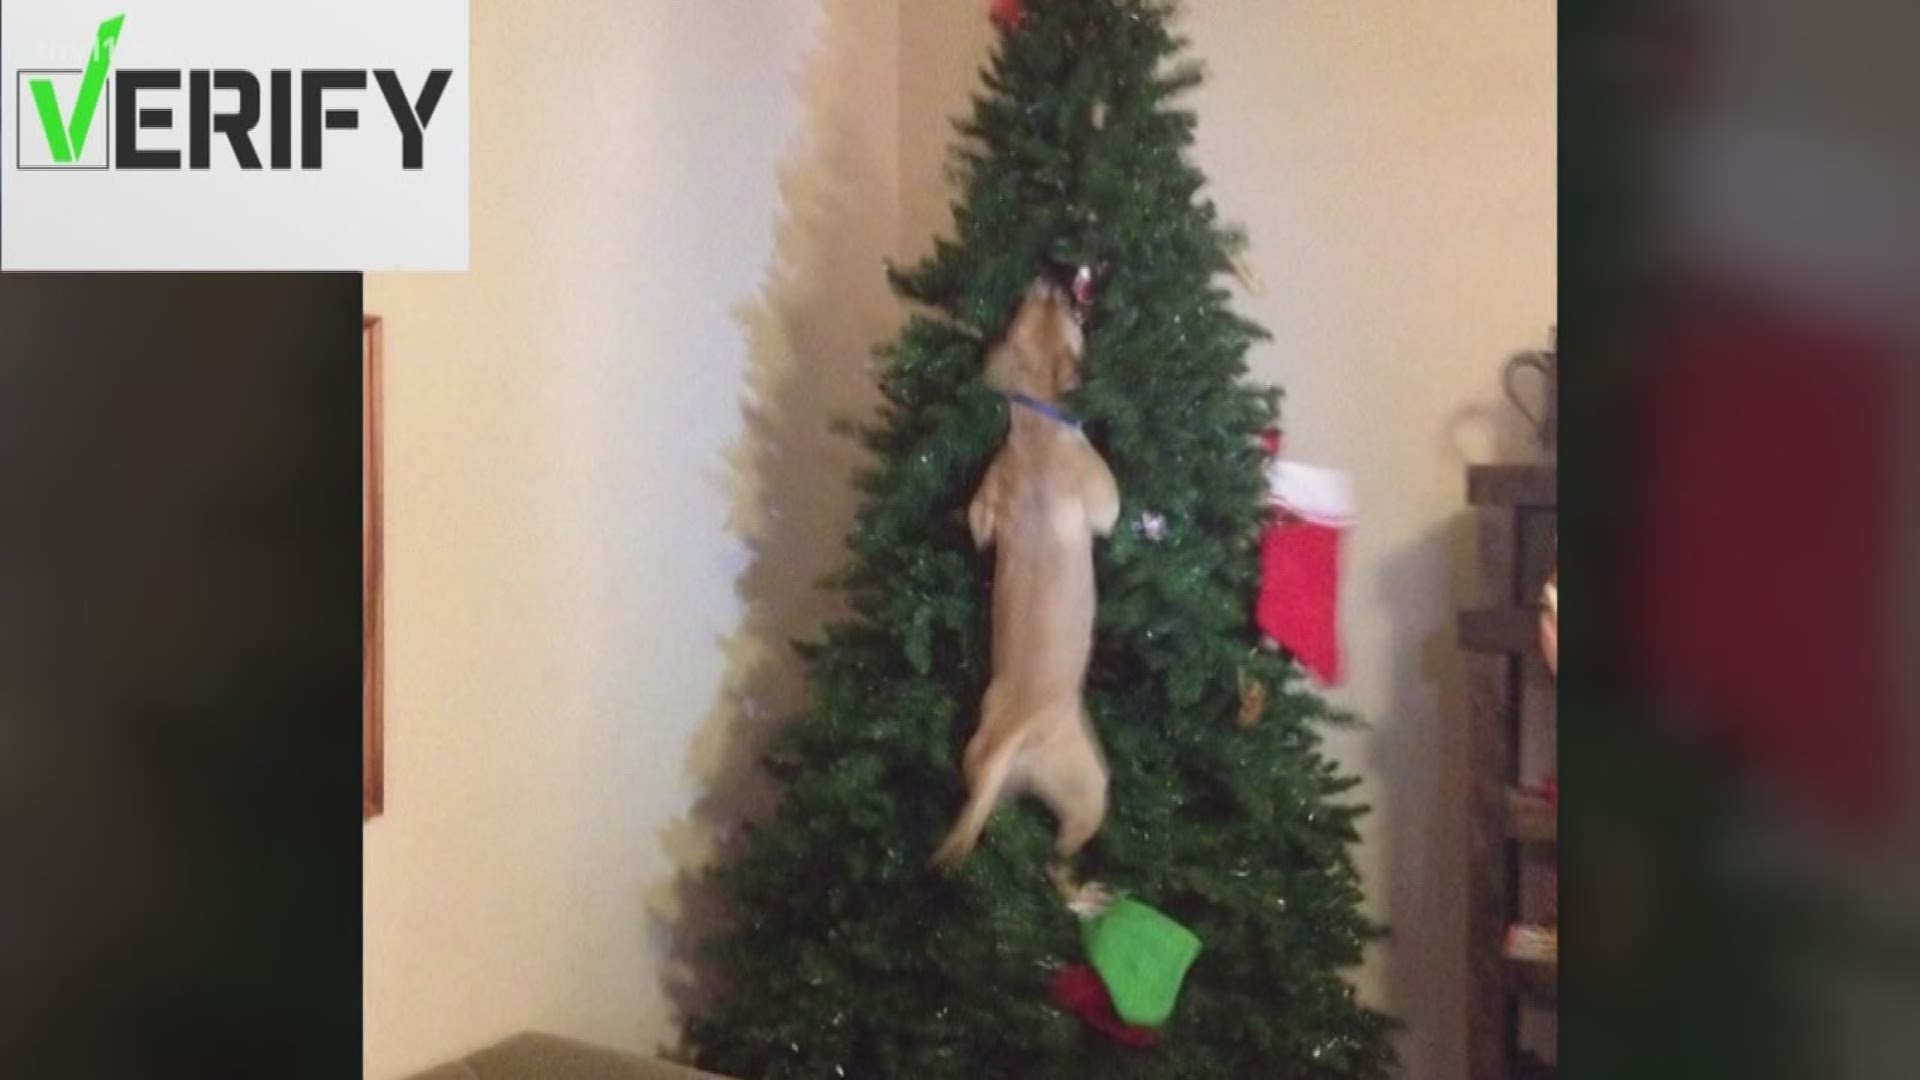 Decorating for Christmas can bring lots of joy... unless you have an overly curious pet.